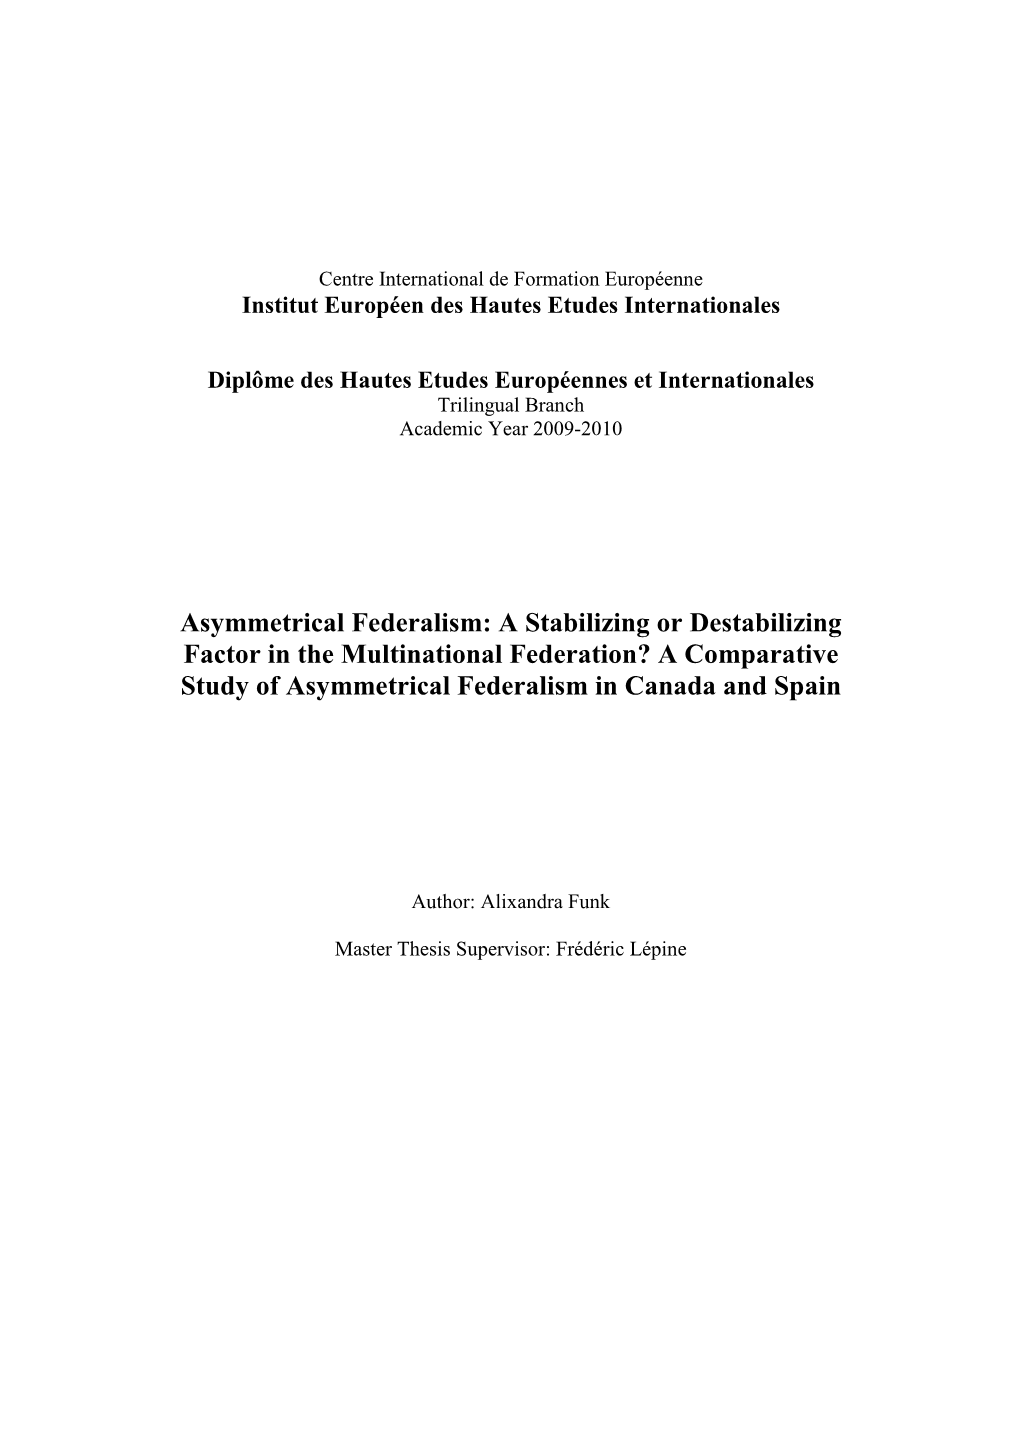 Asymmetrical Federalism: a Stabilizing Or Destabilizing Factor in the Multinational Federation? a Comparative Study of Asymmetrical Federalism in Canada and Spain